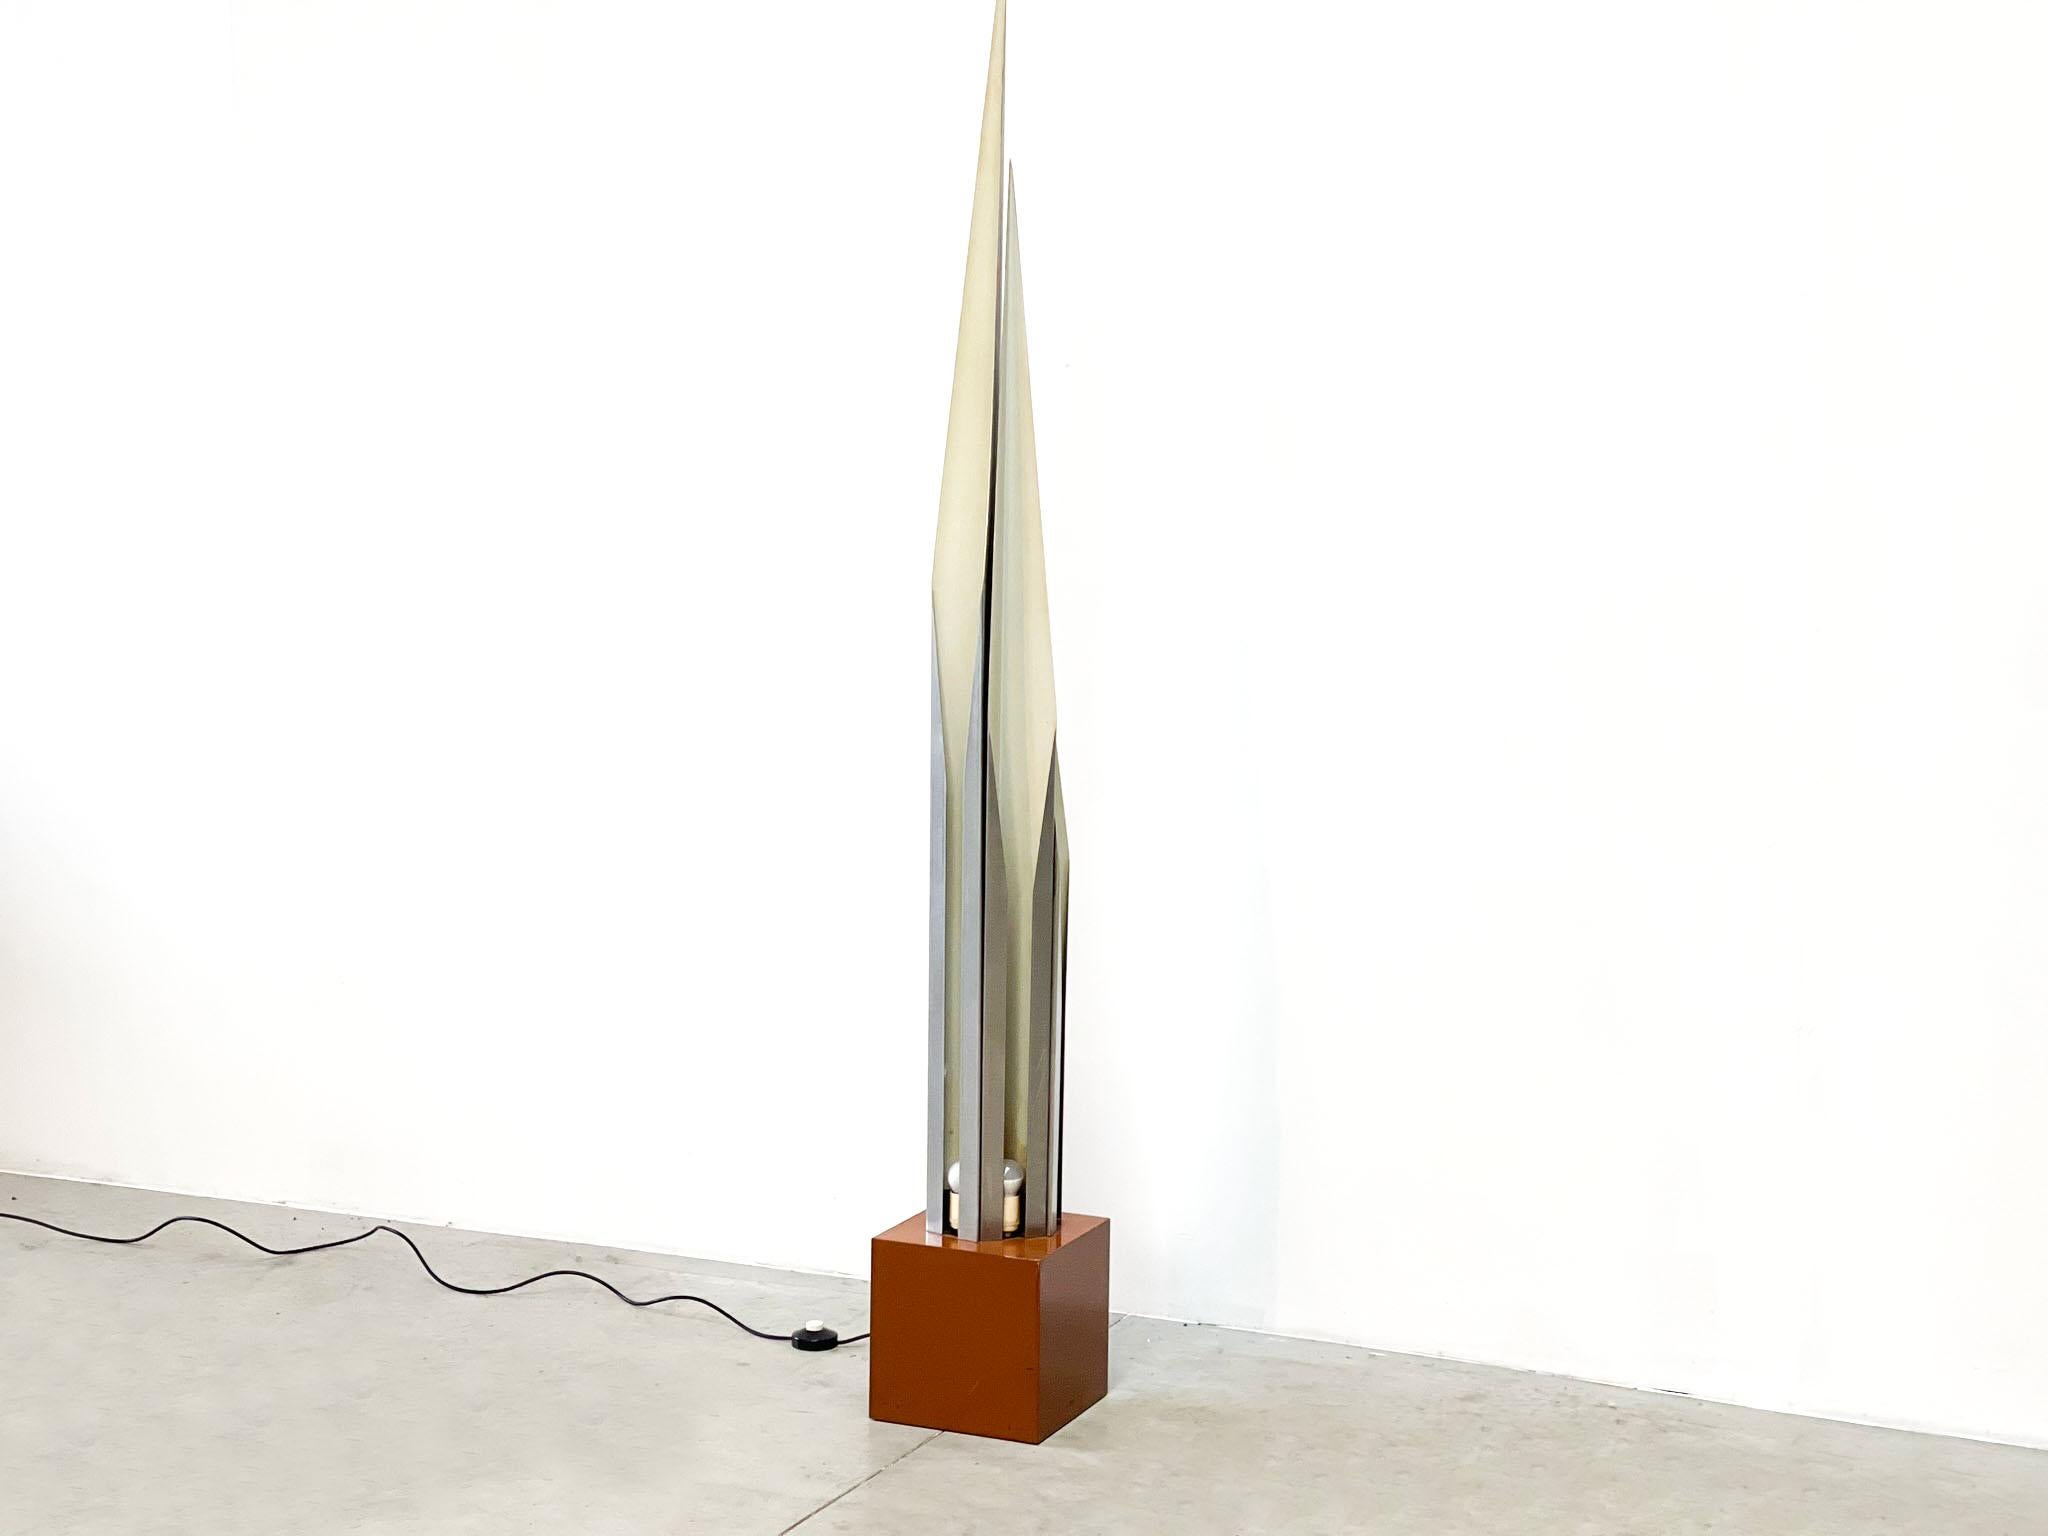 Italian sculptural floor lamp
Very sculptural and stylish Italian floor lamp, made in the 70's in Italy by an unknown manufacturer. Nevertheless it is a beautiful quality floor lamp! The lamps on the base give a amazing light effect! 

